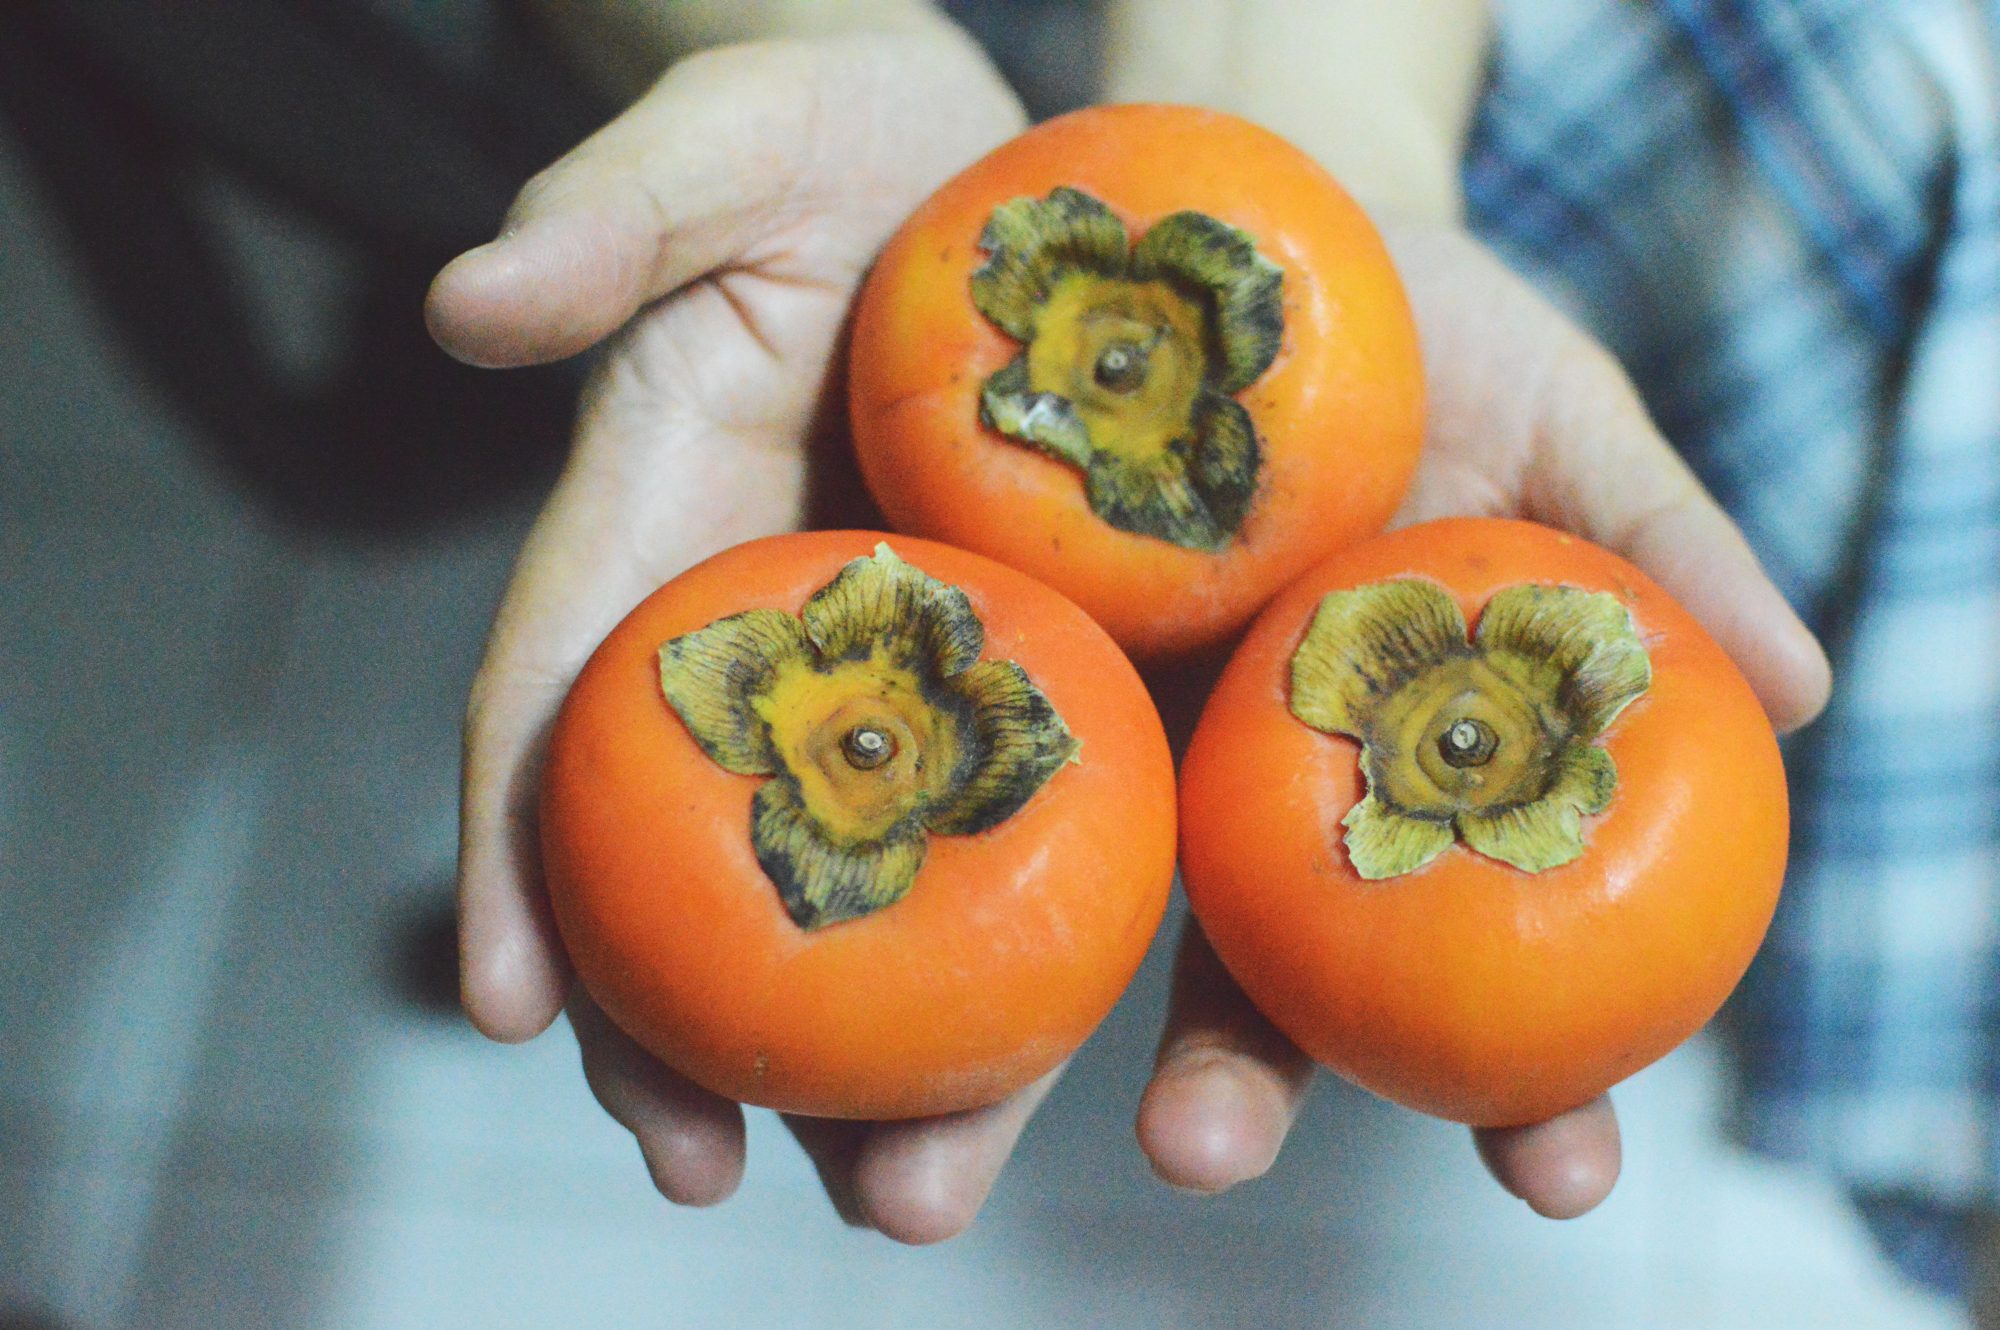 What Is a Persimmon and What Does It Taste Like?